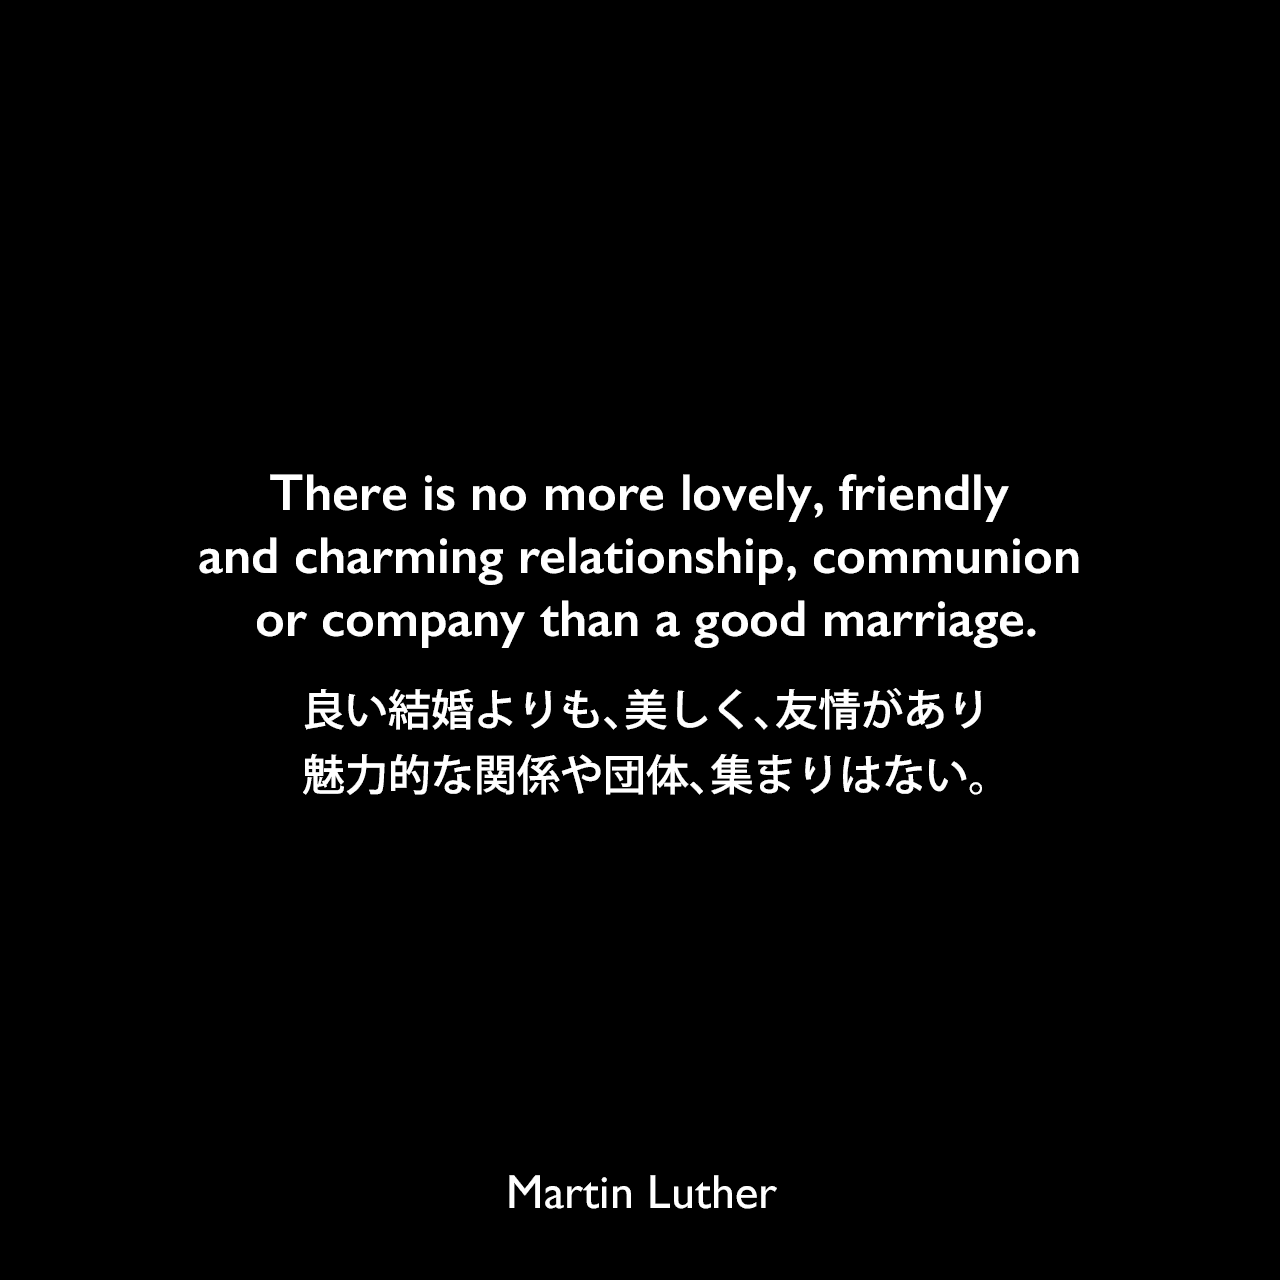 There is no more lovely, friendly and charming relationship, communion or company than a good marriage.良い結婚よりも、美しく、友情があり、魅力的な関係や団体、集まりはない。- マルティン・ルターによる本「Table Talk」よりMartin Luther